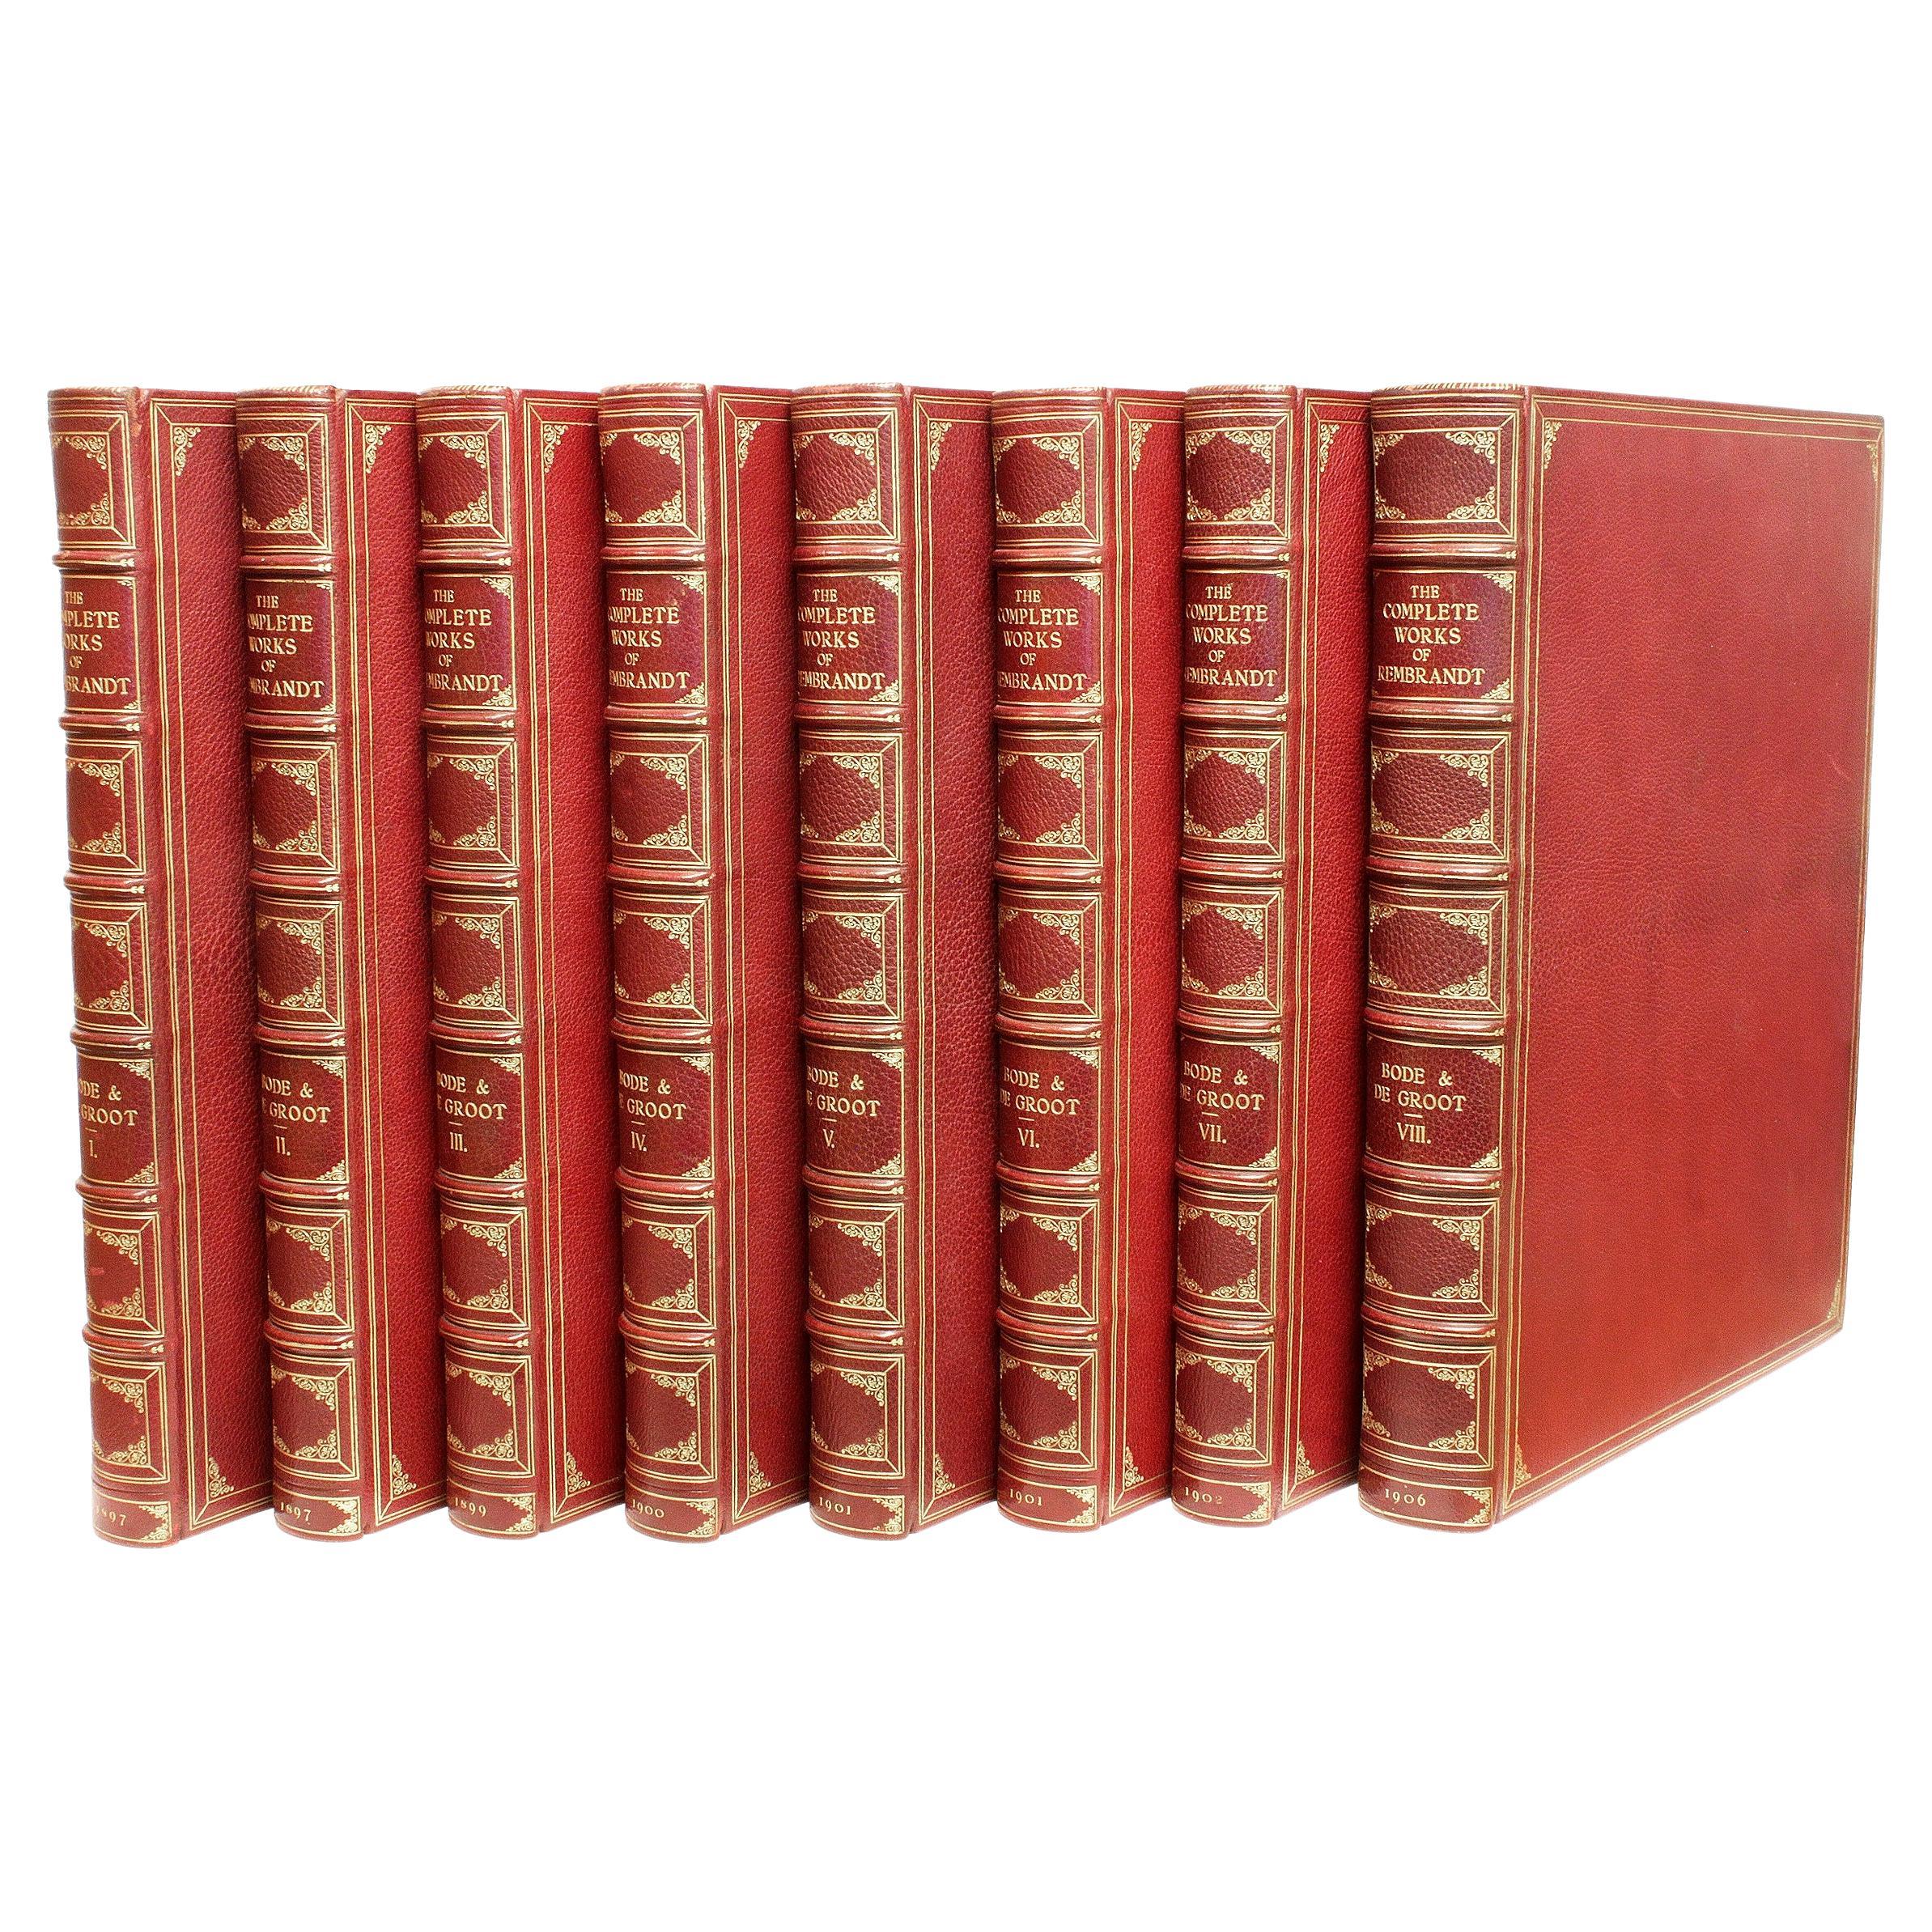 BODE - GROOT. Complete Work of Rembrandt. 8 vols. ALL FIRST EDITIONS - 1897-1906 For Sale